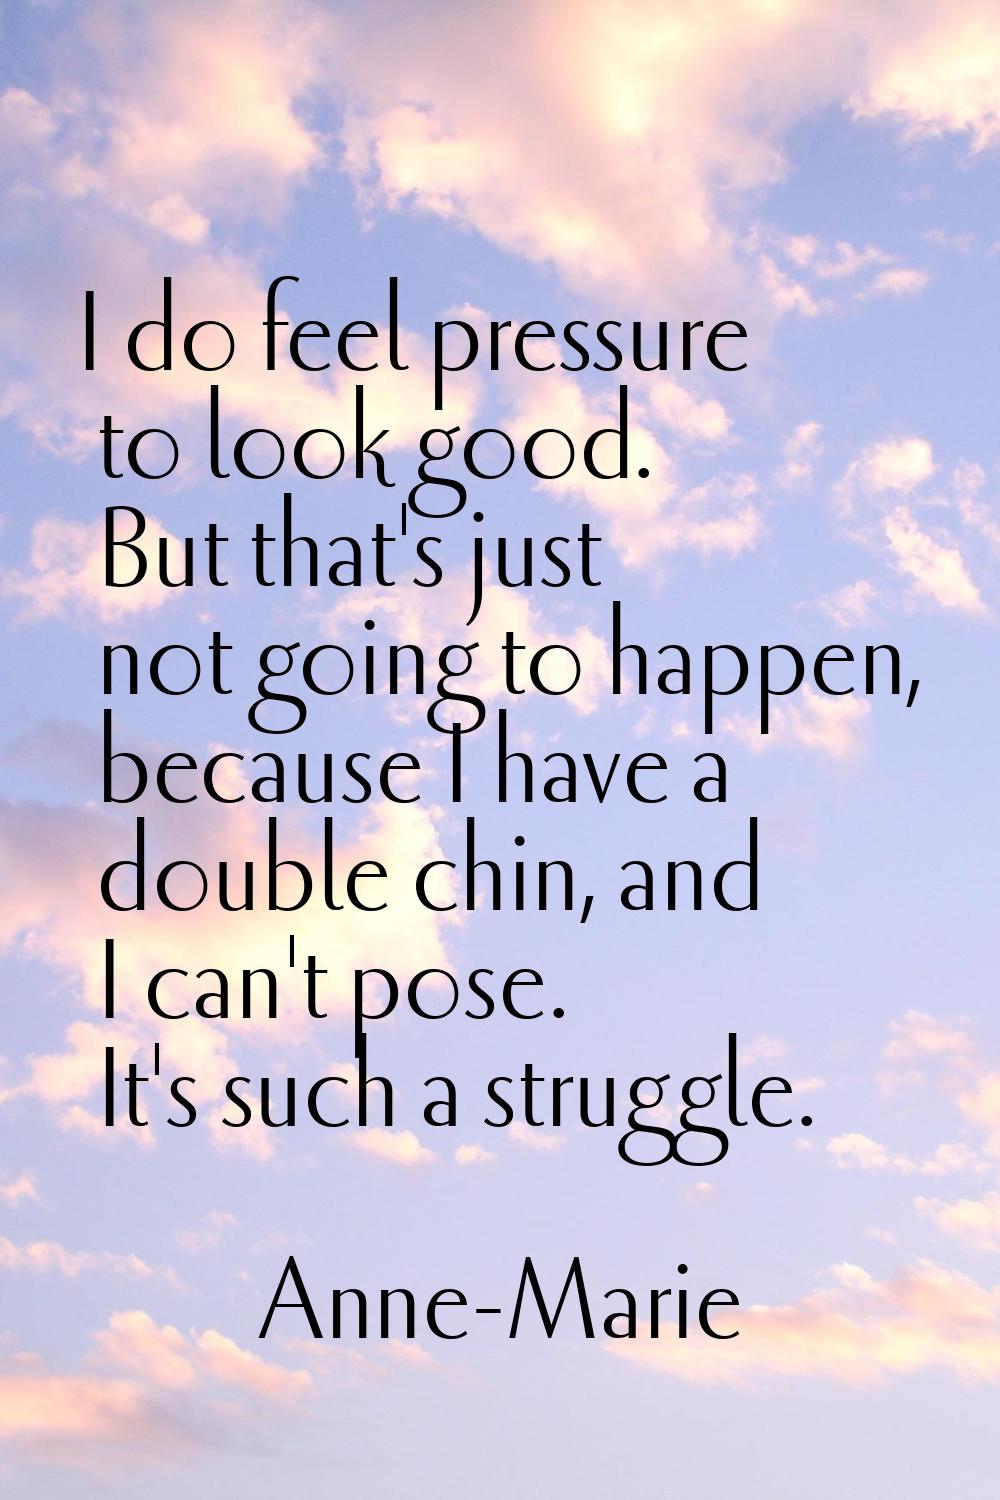 I do feel pressure to look good. But that's just not going to happen, because I have a double chin,